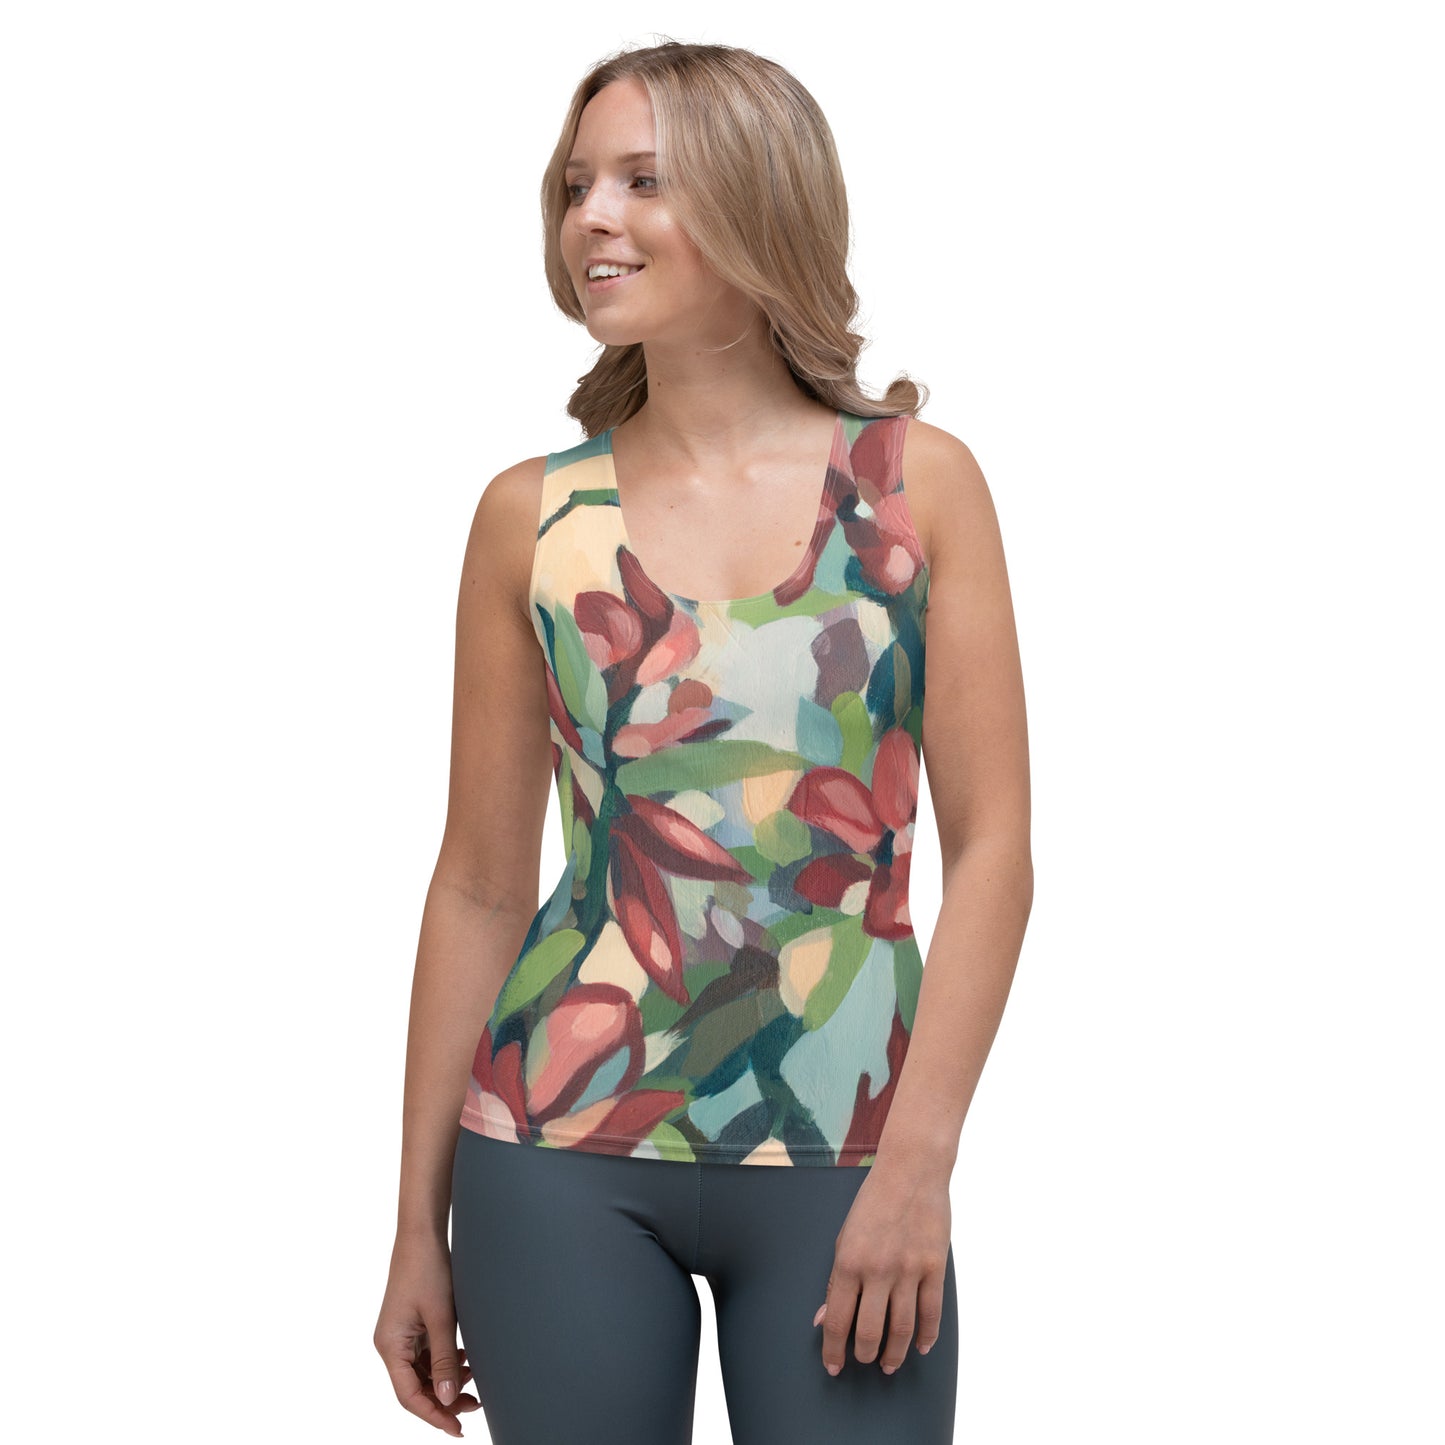 Lover's Touch Tank Top